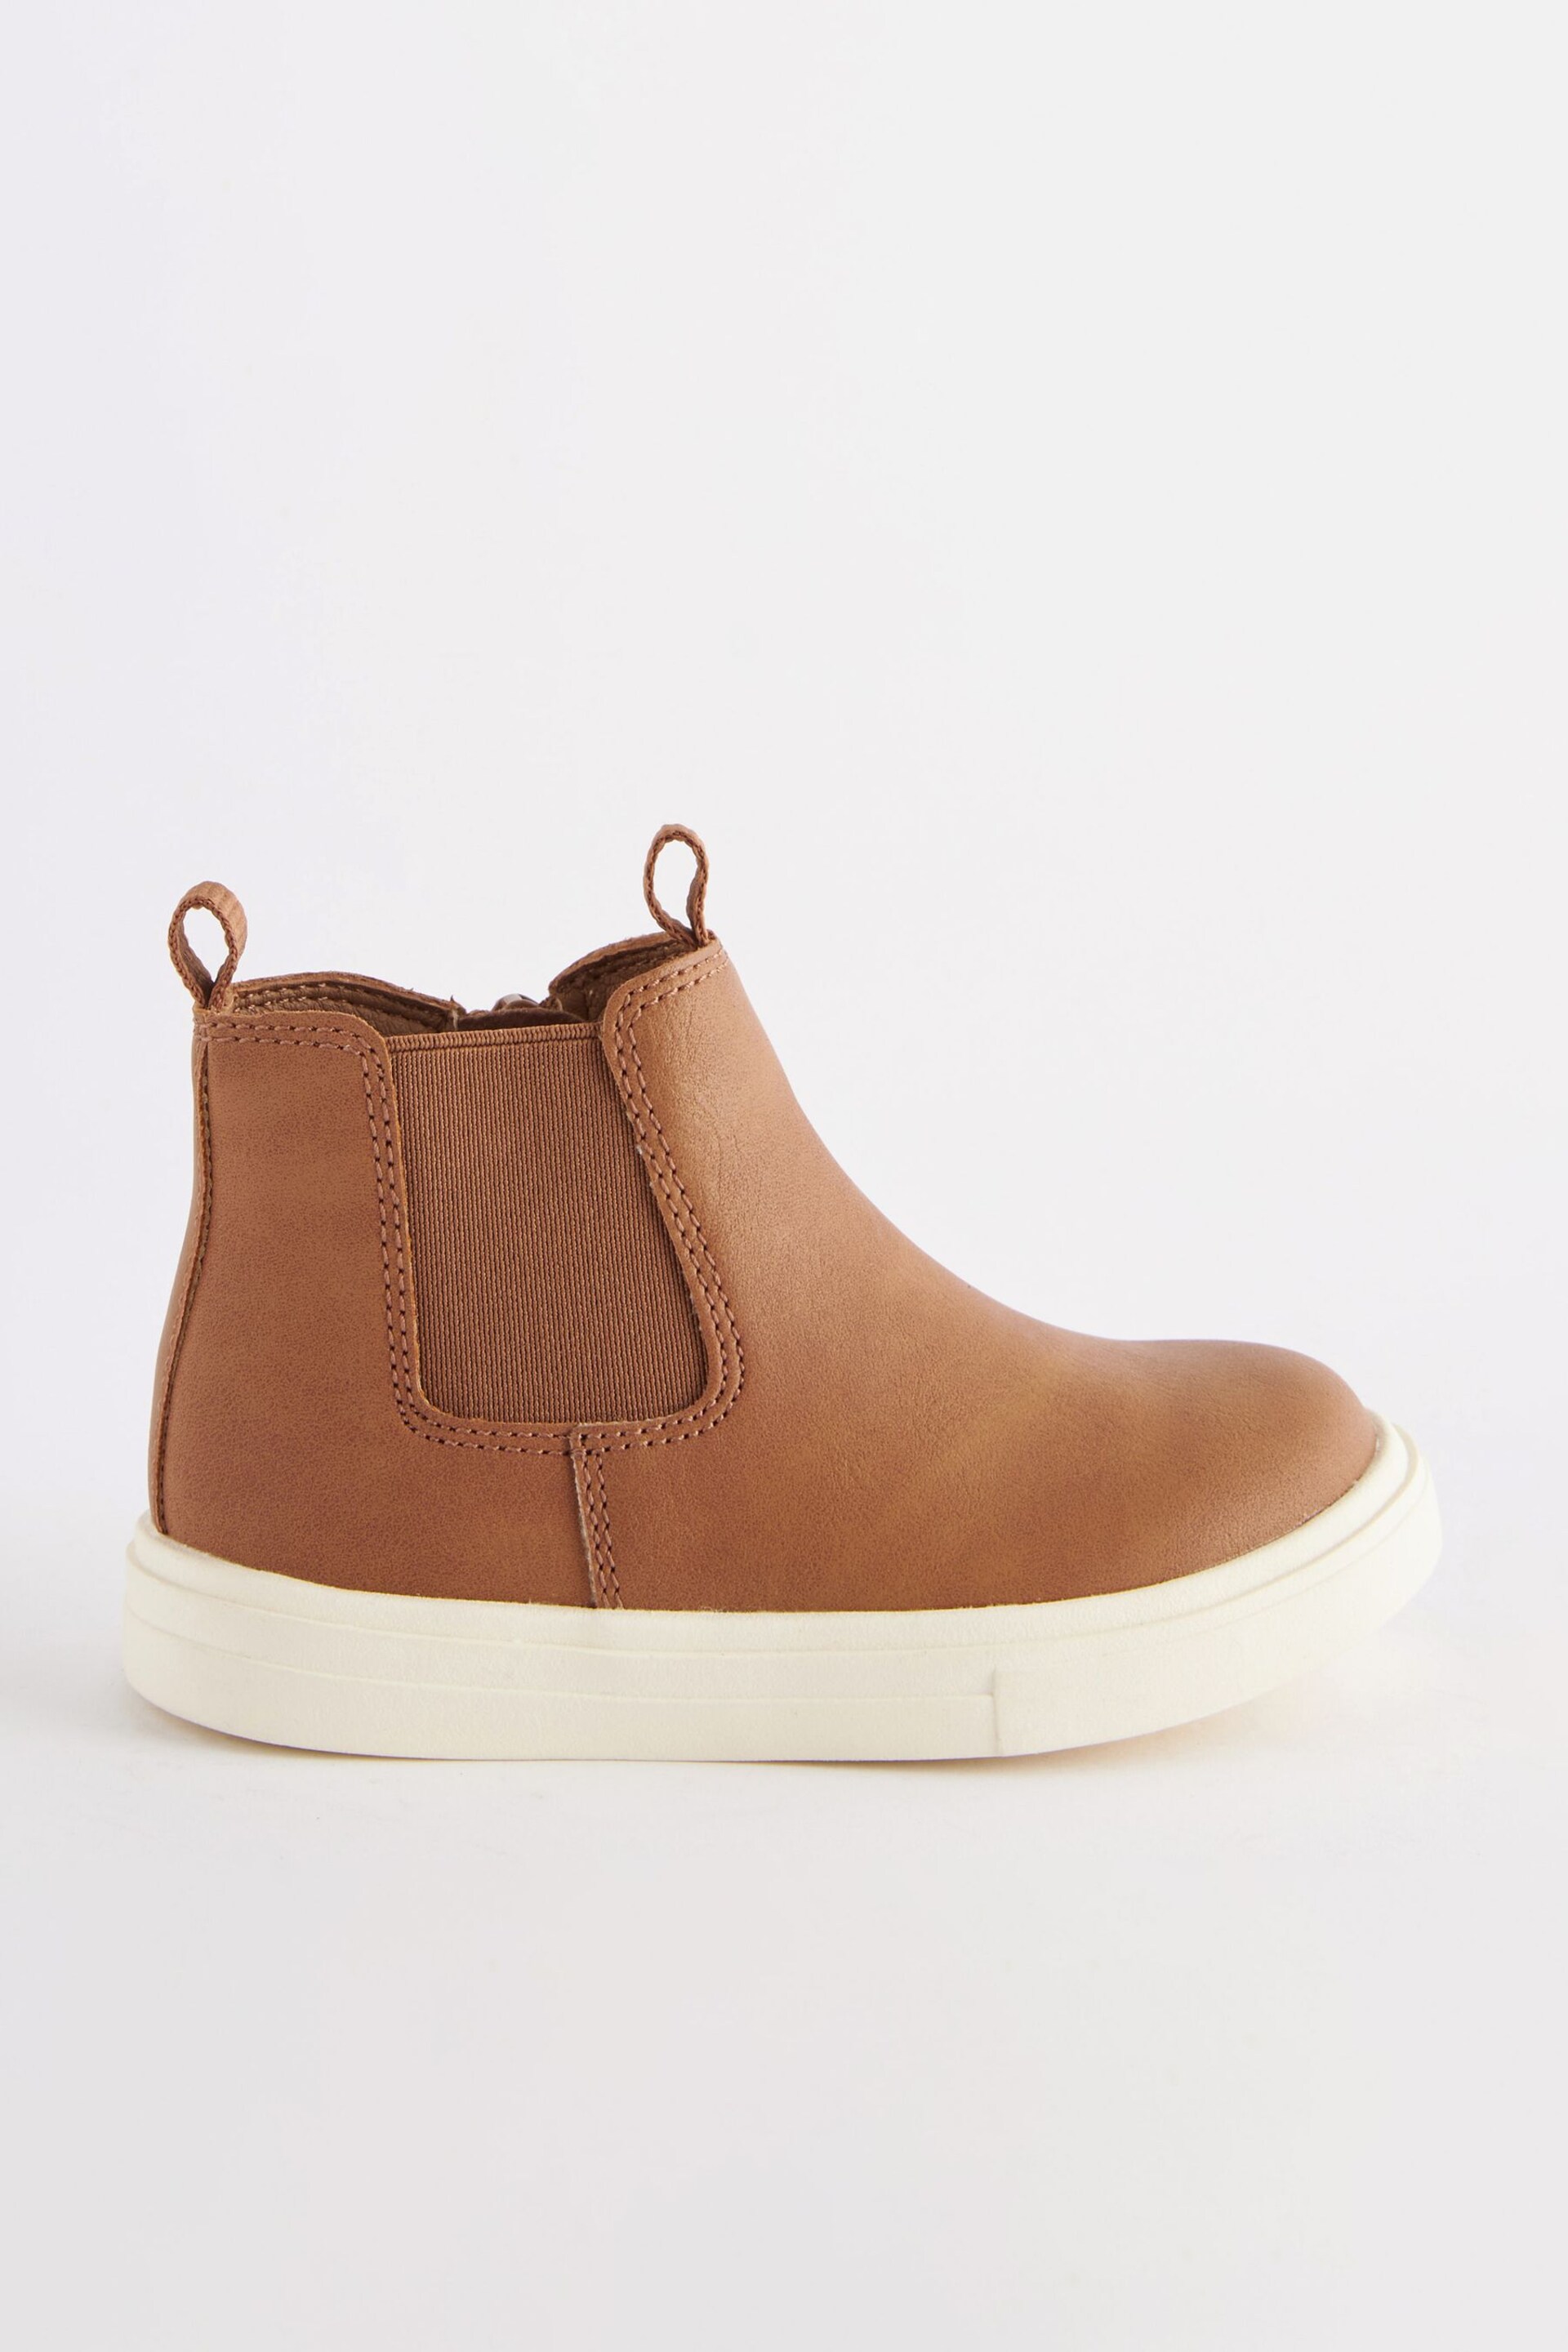 Tan Brown Standard Fit (F) Chelsea Boots with Zip Fastening - Image 2 of 5